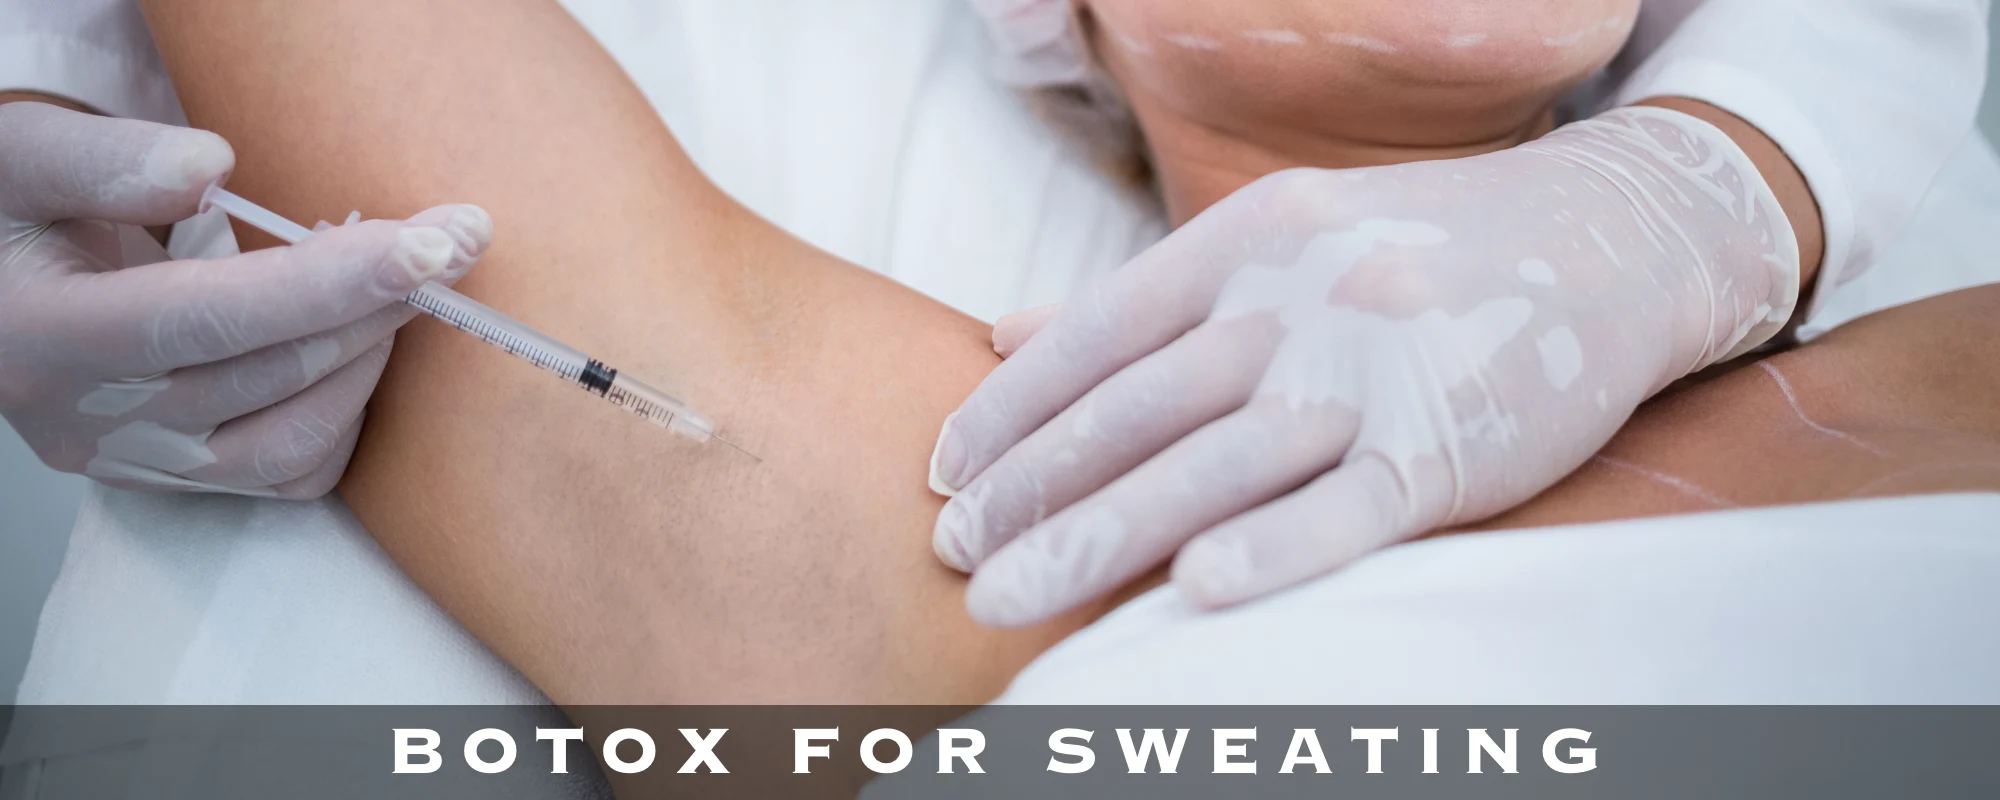 BOTOX FOR SWEATING